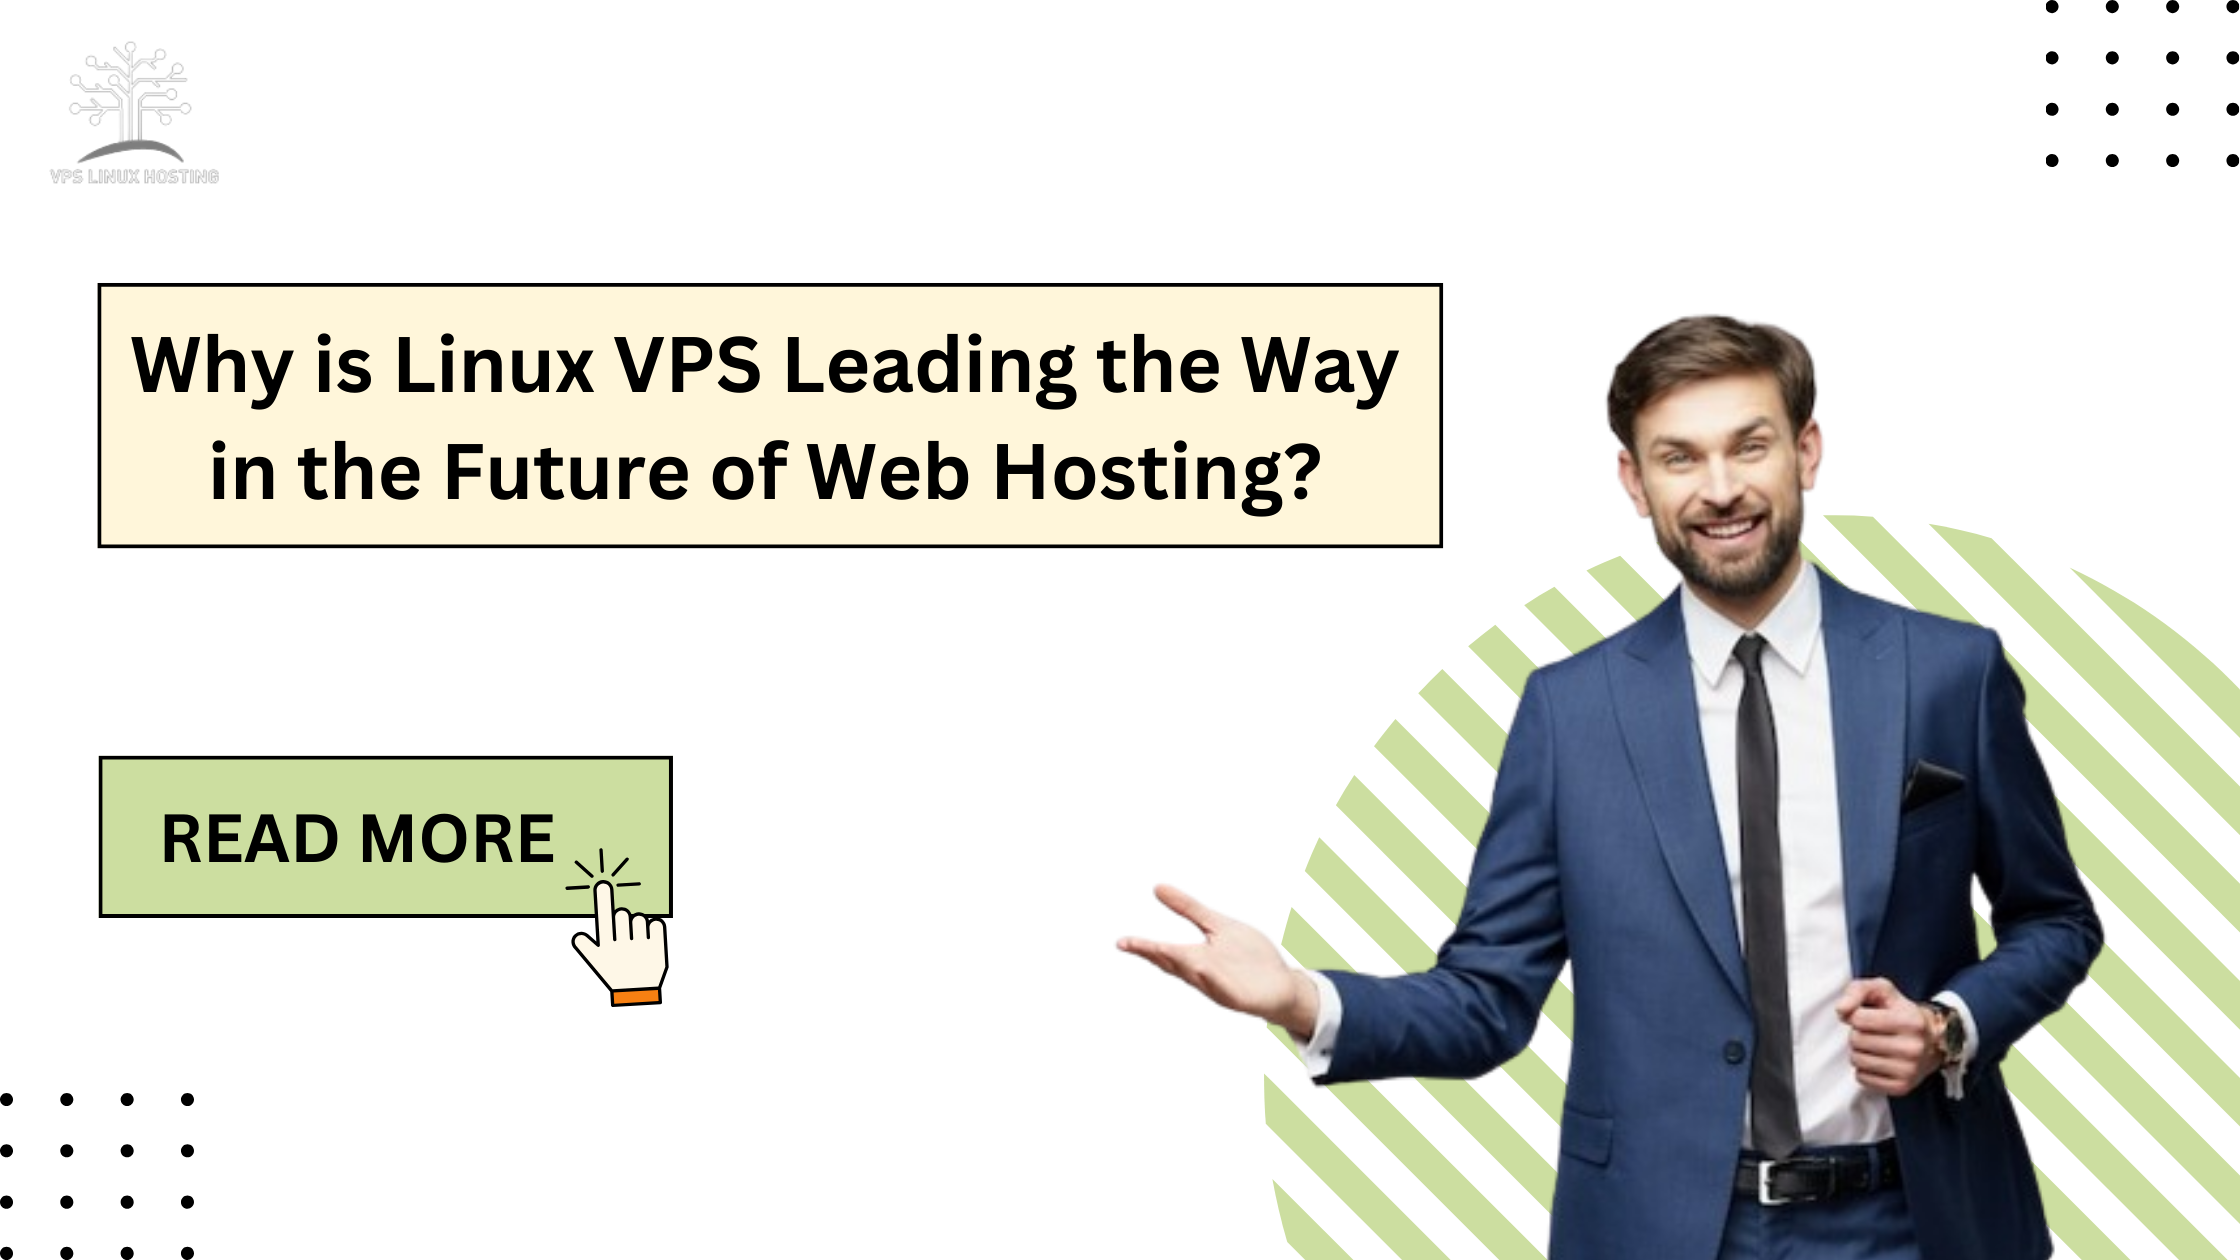 Why is Linux VPS Leading the Way in the Future of Web Hosting?